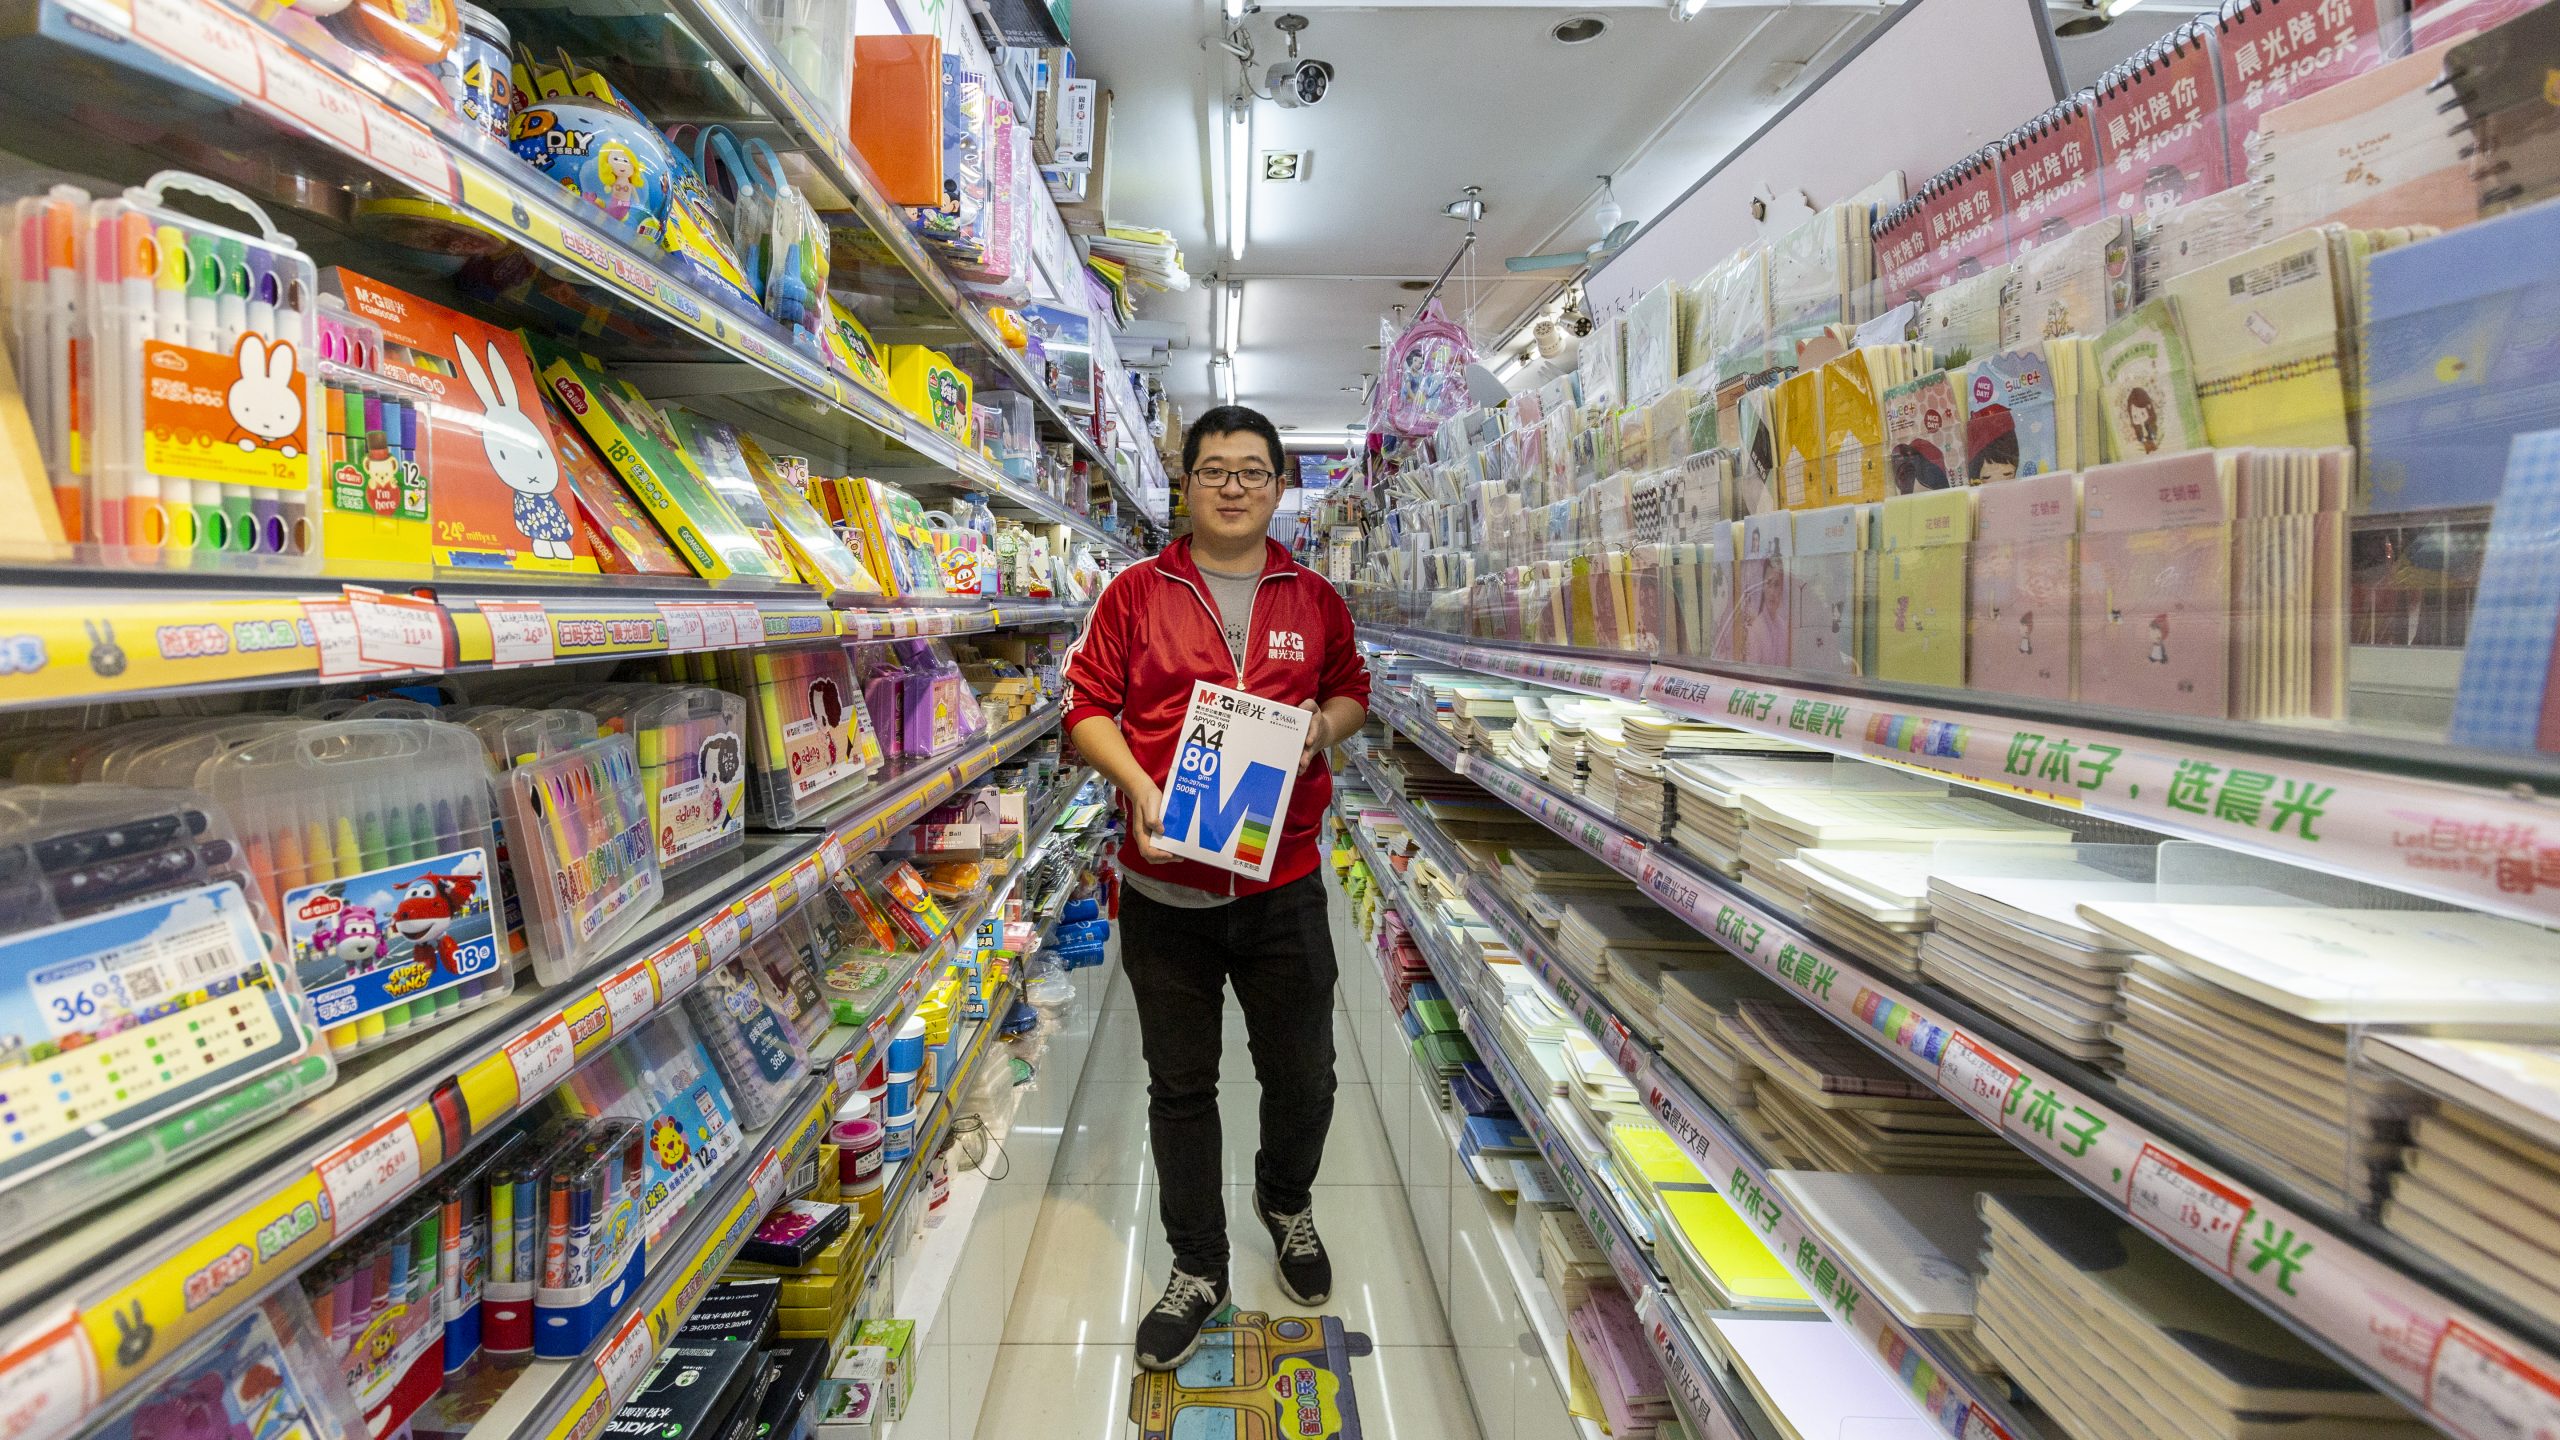 Salesperson displaying copy paper in a stationary store in Shanghai - photo by photographer Tuomas Harjumaaskola, China